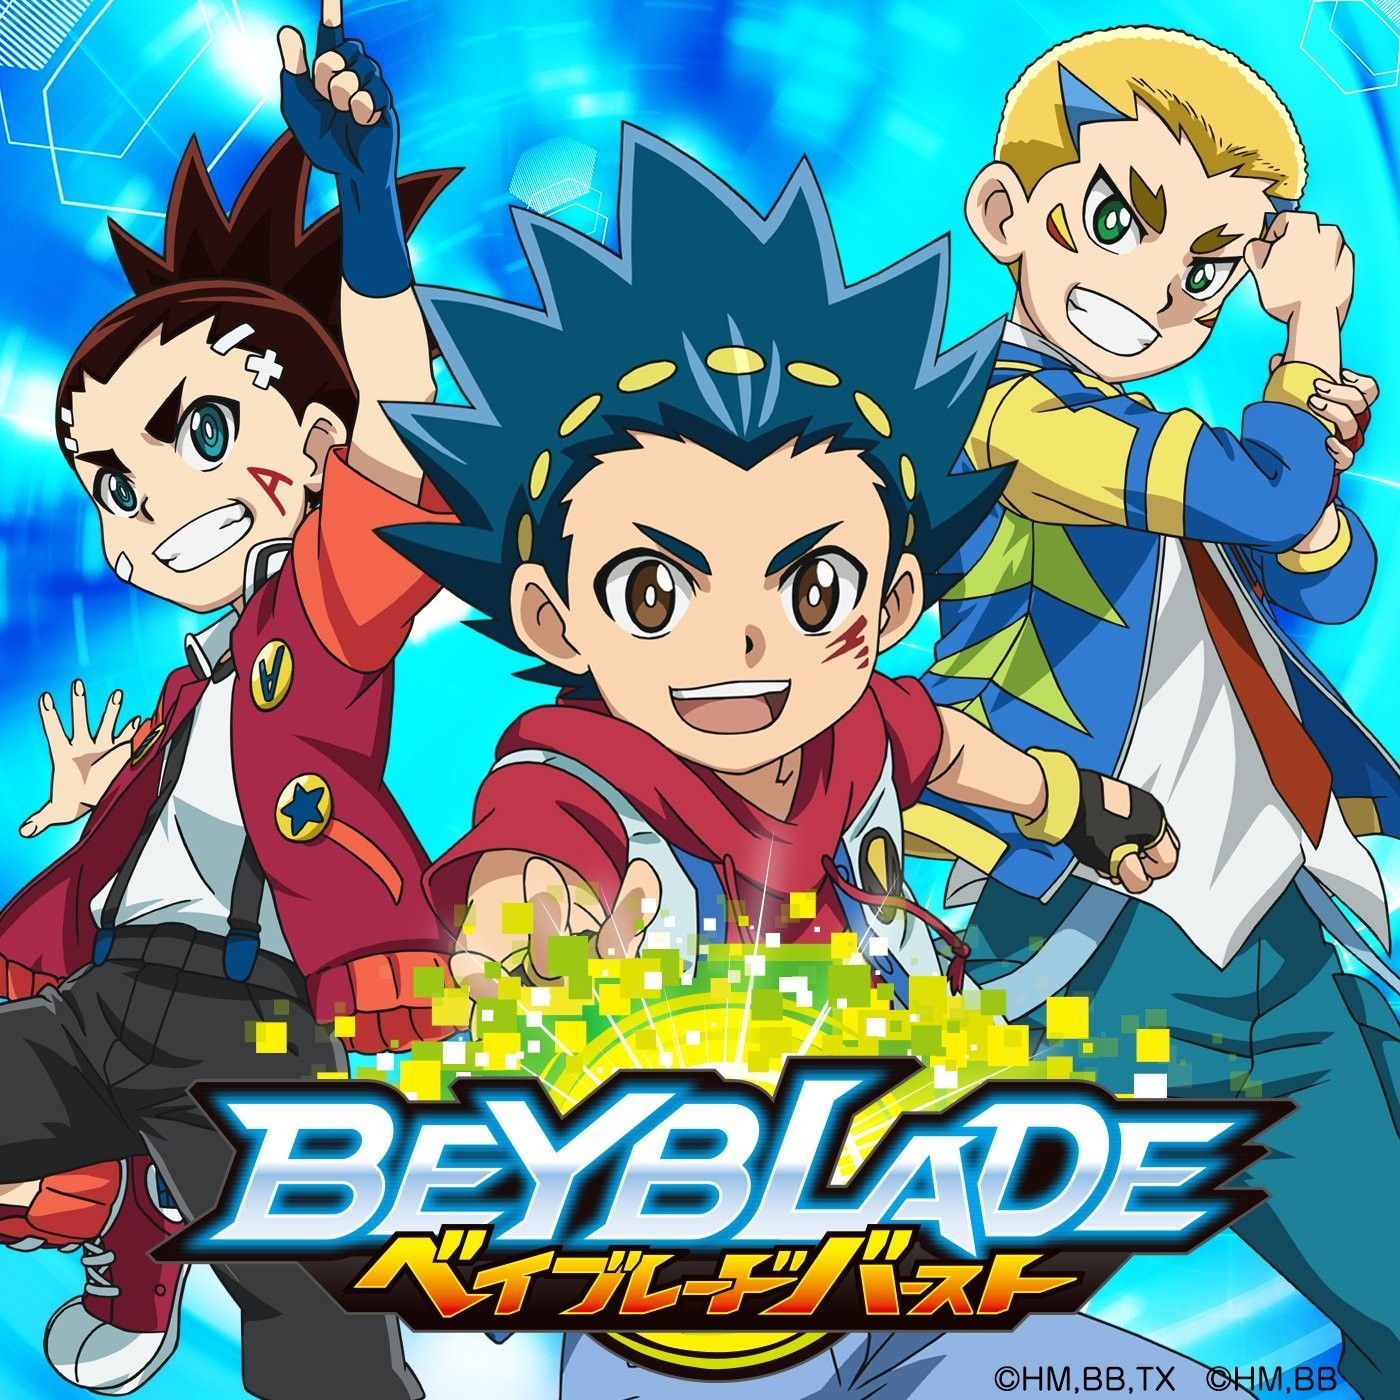 The 3 main characters of Beyblade Burst: Valt Aoi seasons 1 and 2